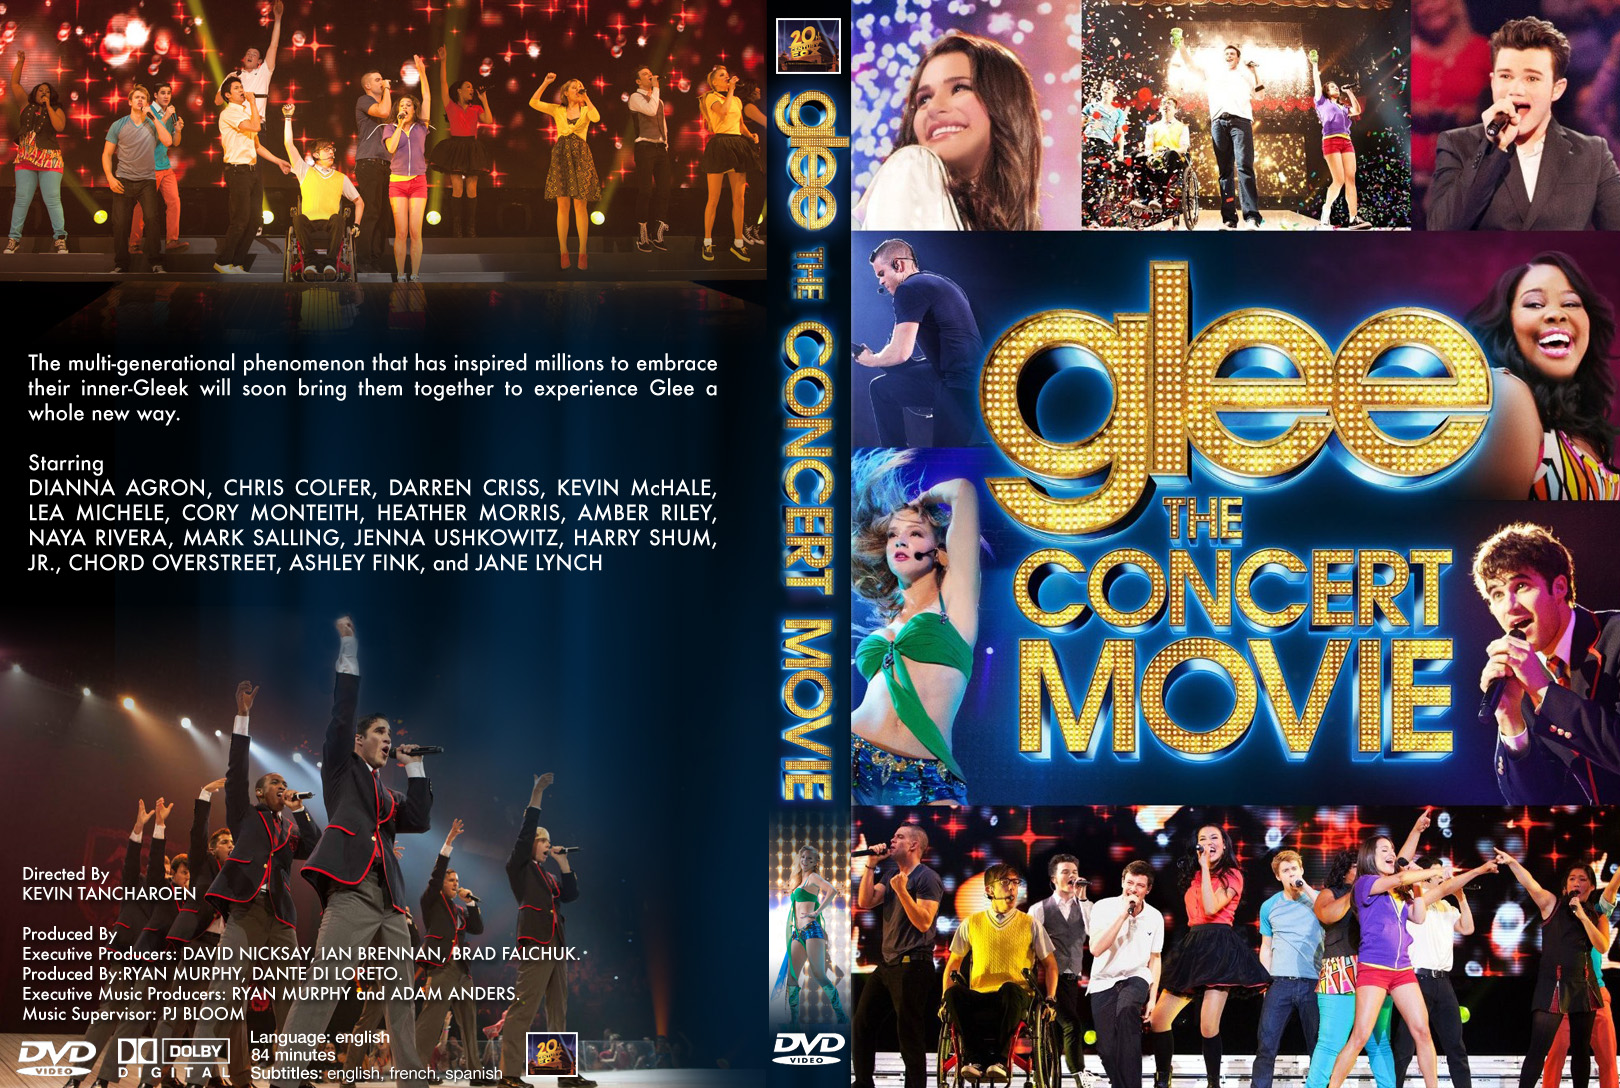 Jaquette DVD Glee the concert movie custom